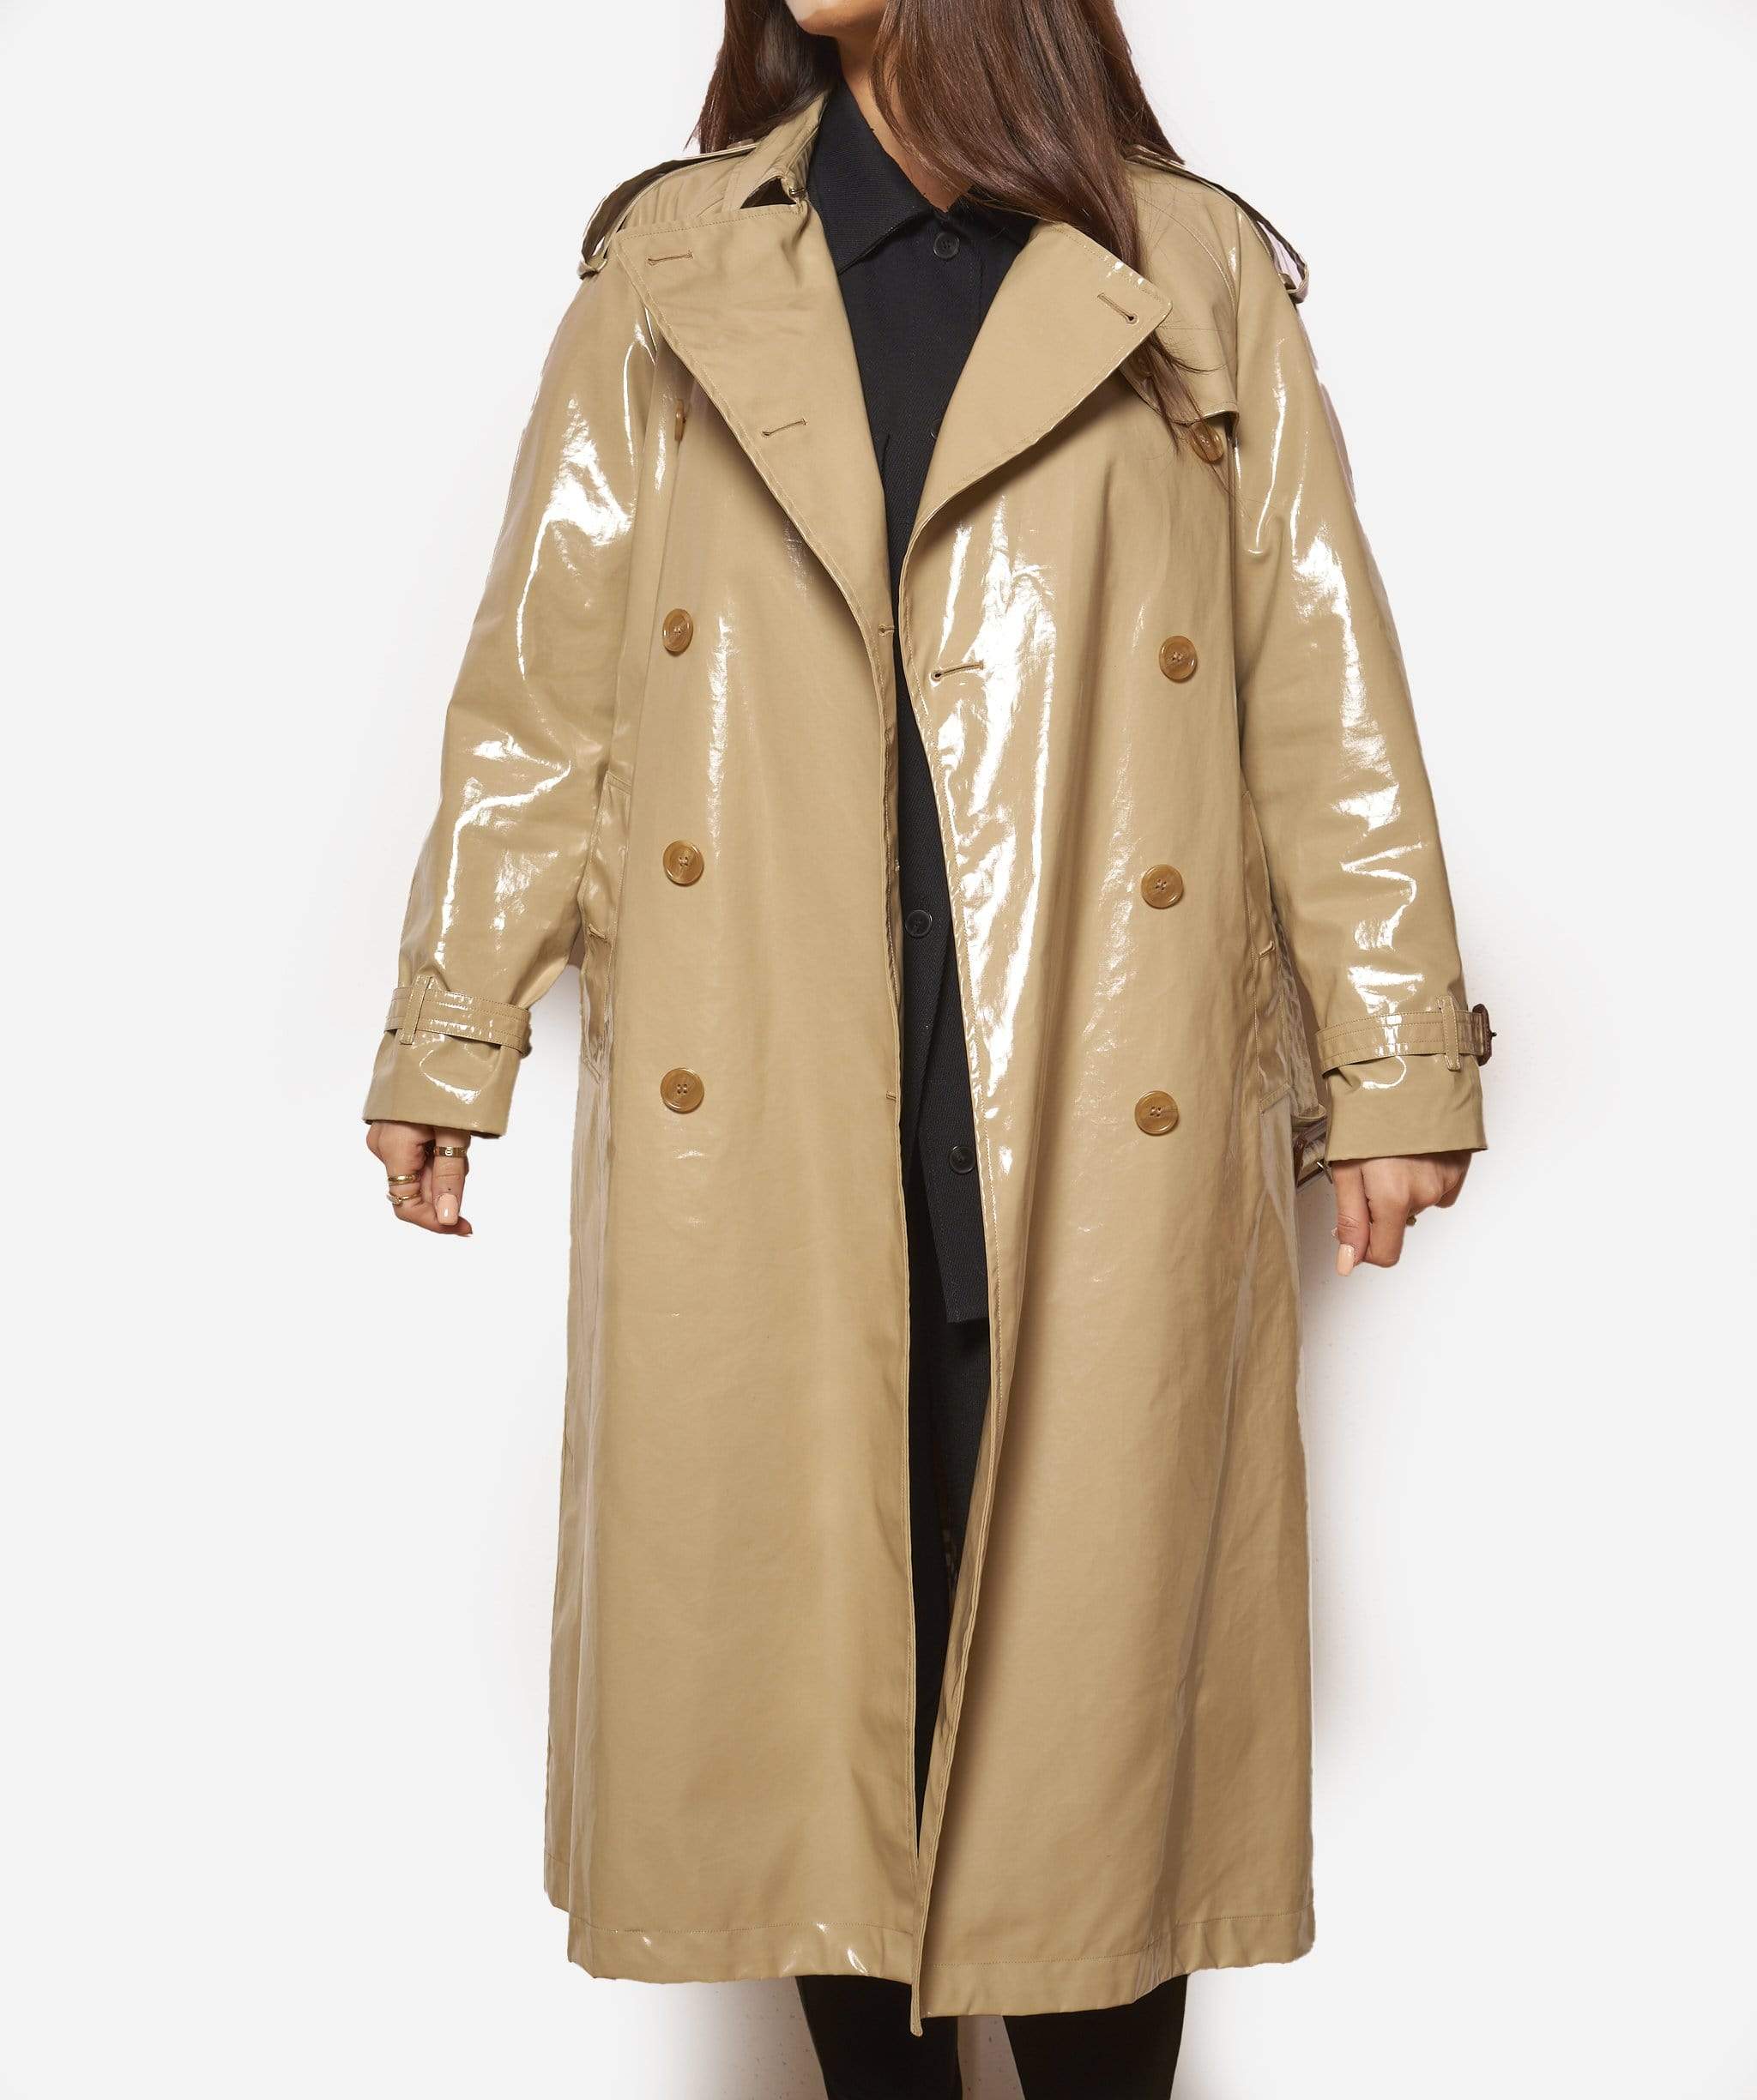 Burberry Burberry trench coat ADC1001